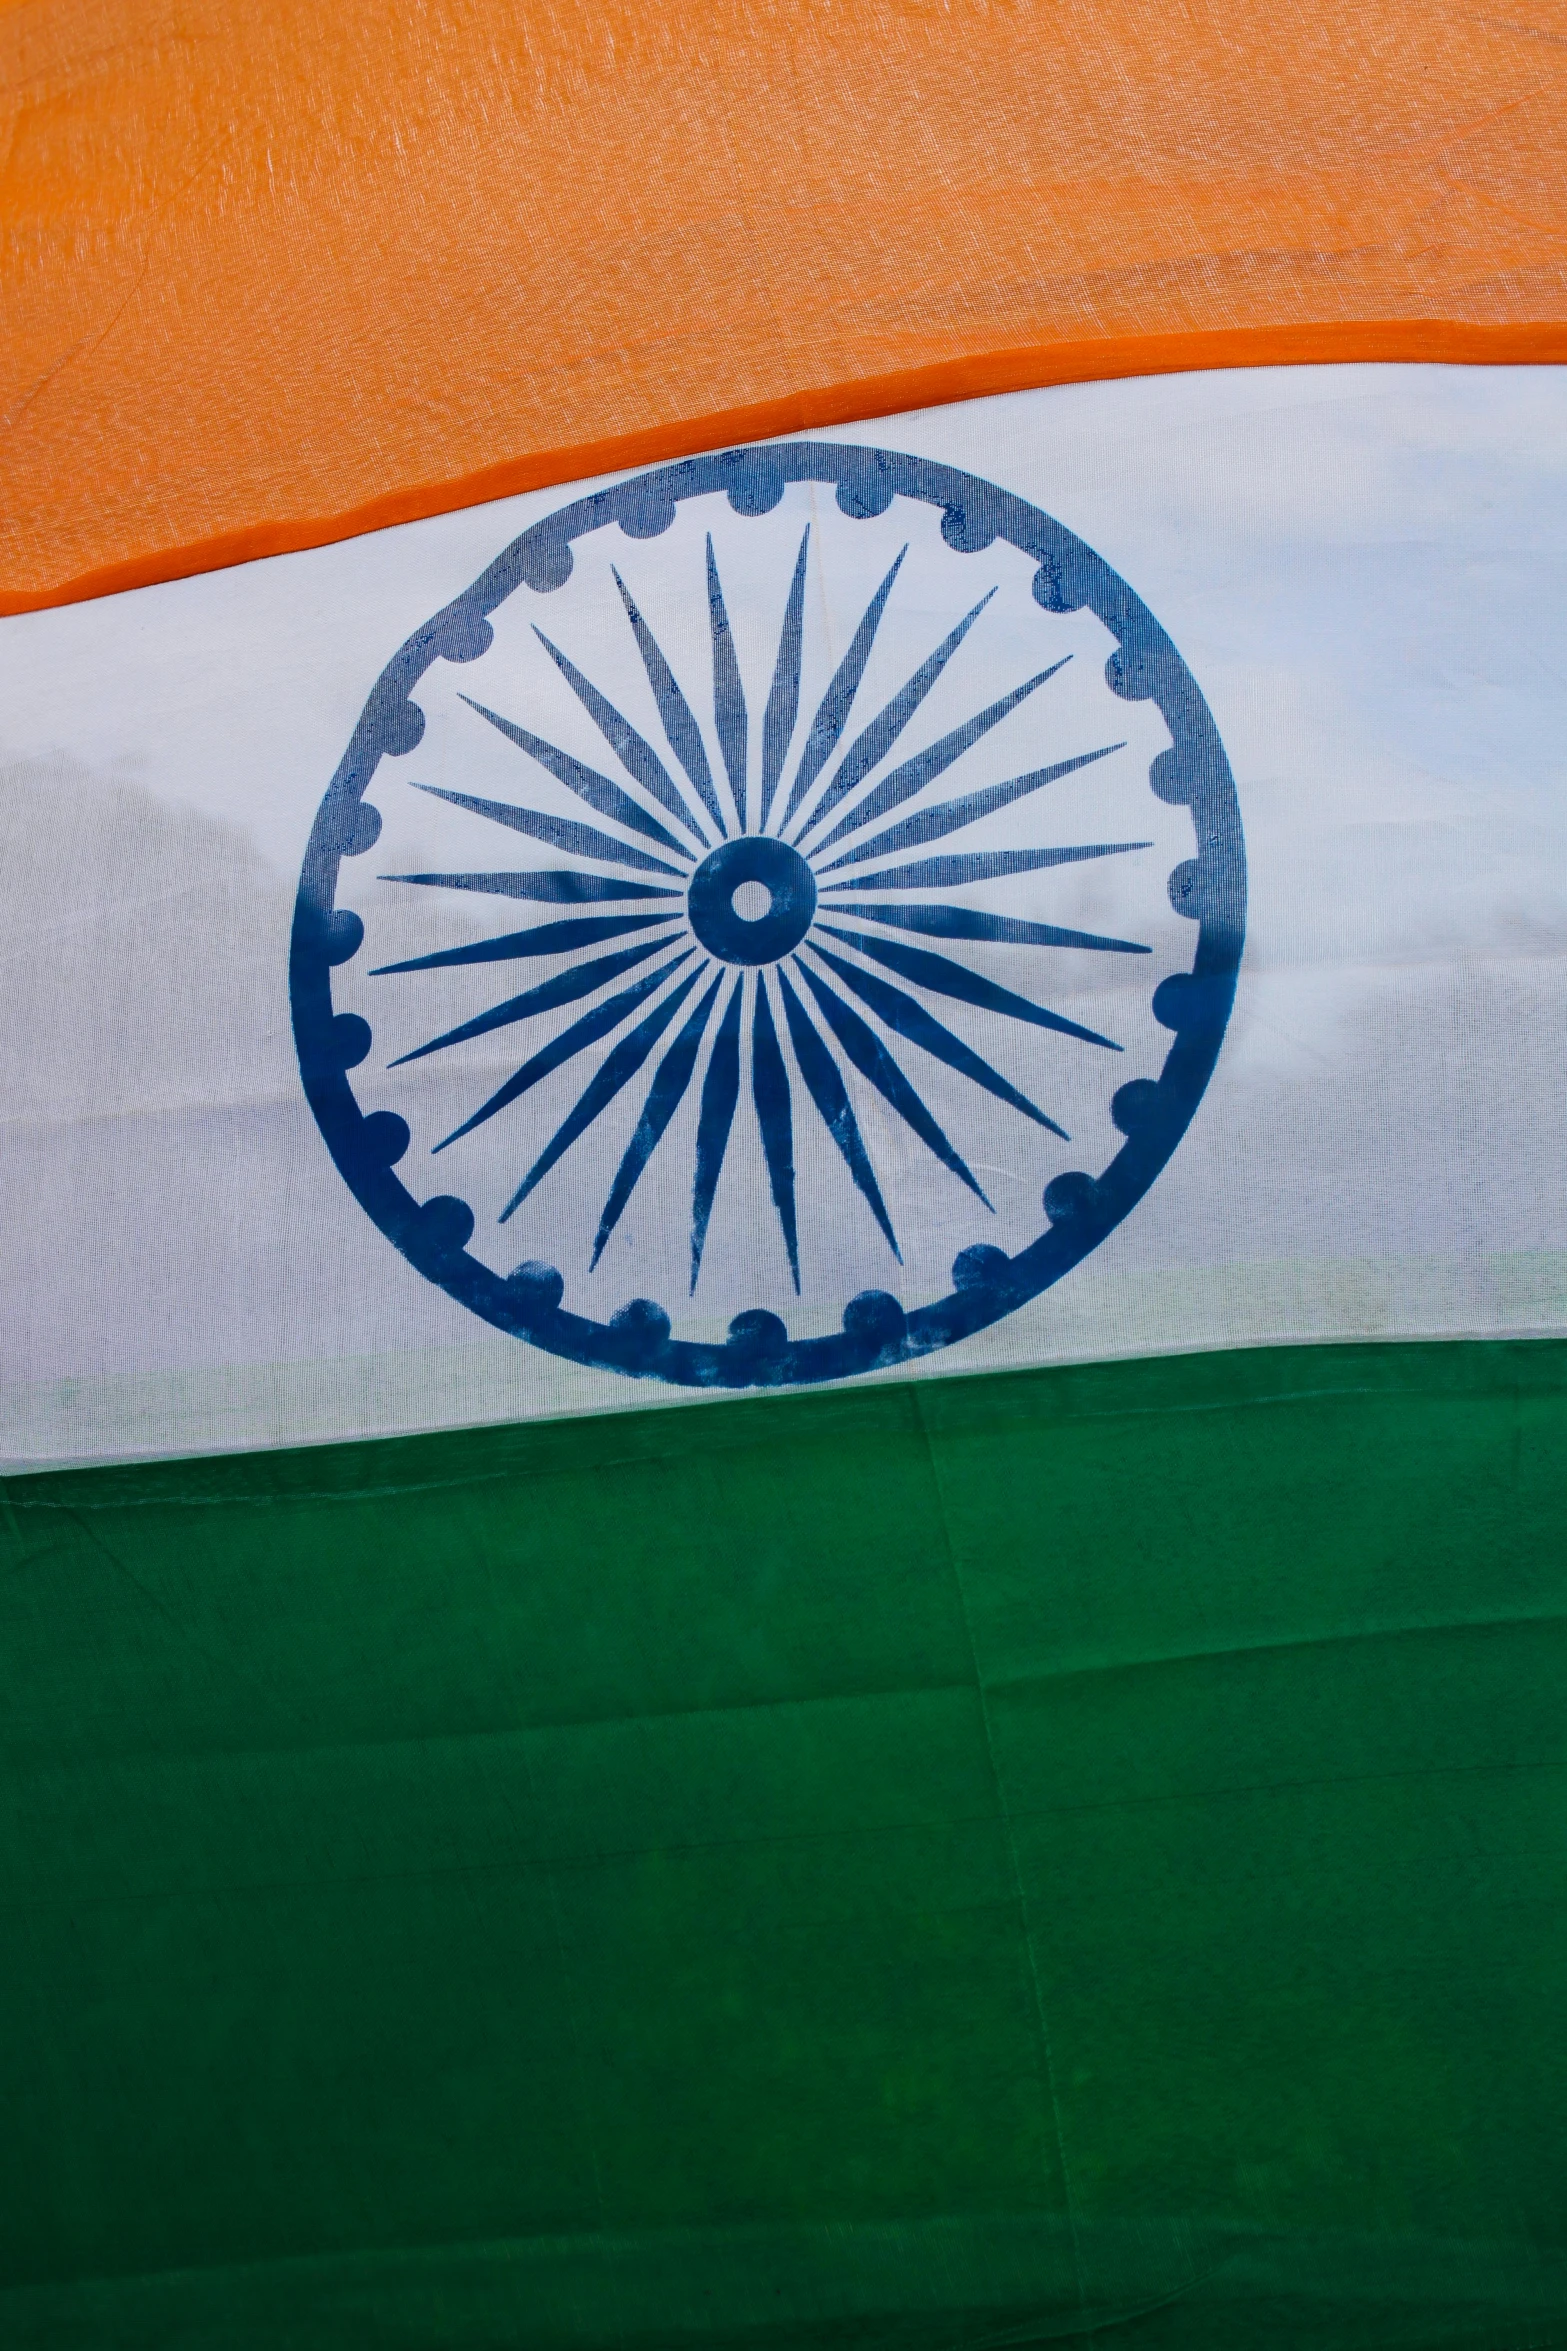 a large indian flag that has the colors of blue, green and orange